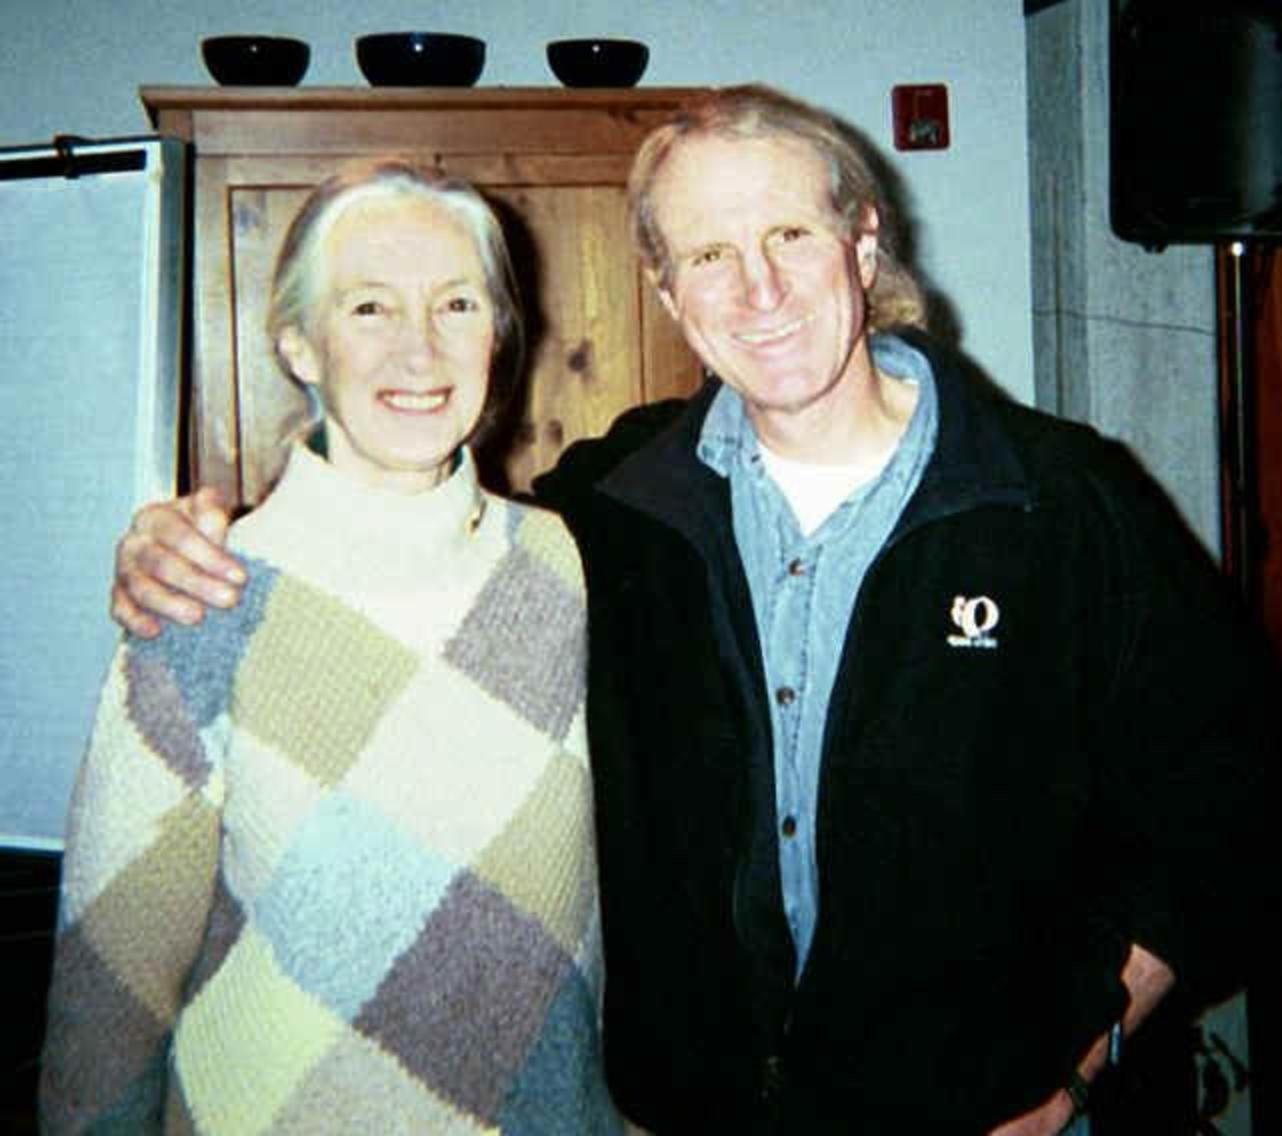 Longtime friends Bekoff and Dr. Jane Goodall in 1998. Together they founded Ethologists for the Ethical Treatment of Animals. Bekoff also co-edited a book, &quot;The Jane Effect&quot; about Goodall's global role in inspiring young people to get involved with conservation.